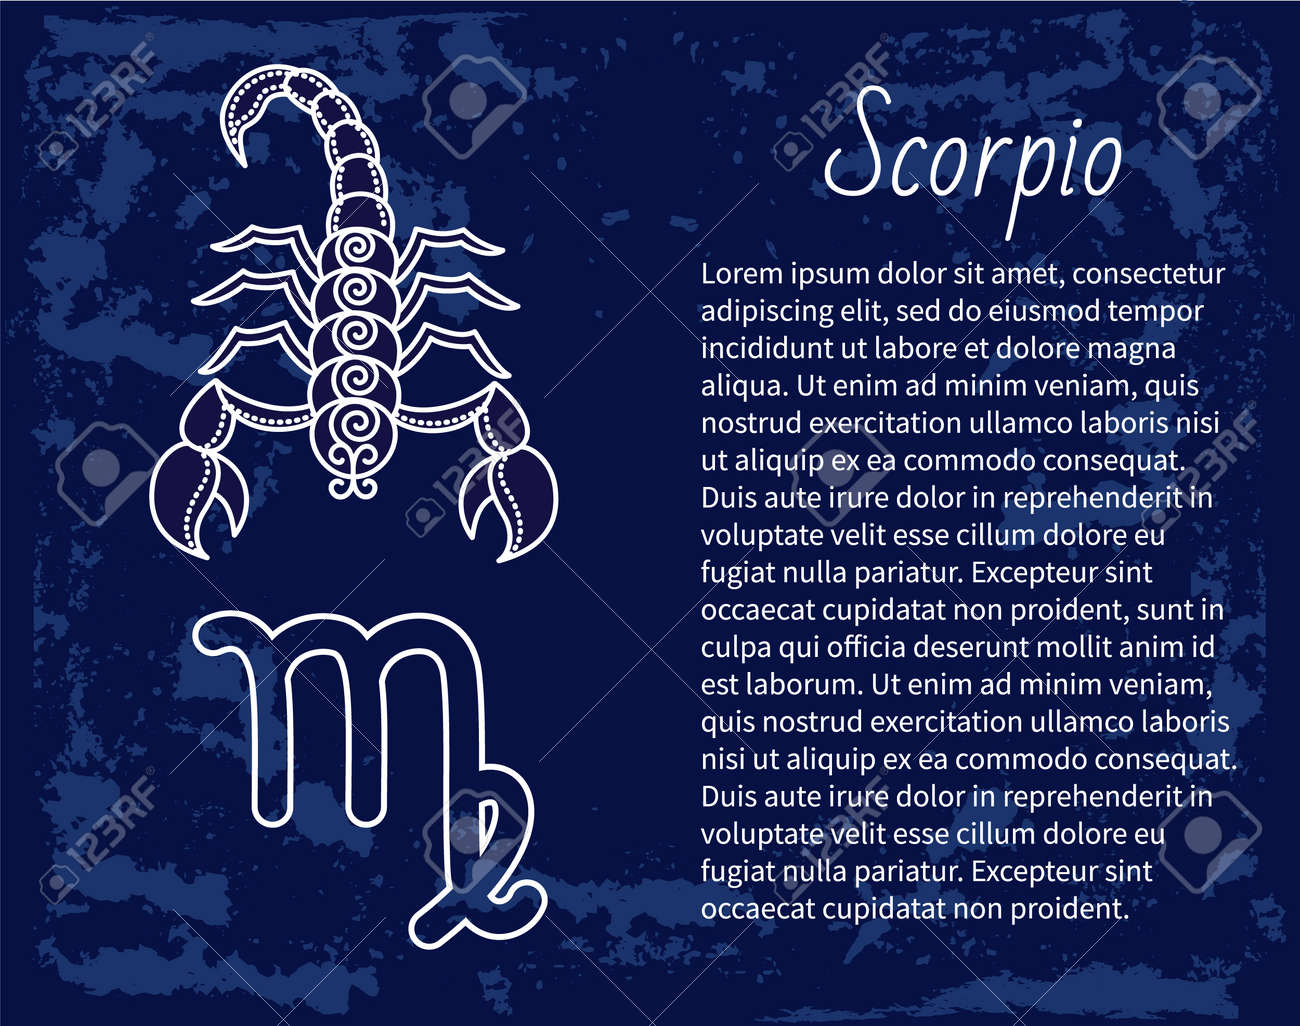 Detail Images Of Scorpio Zodiac Sign Nomer 5